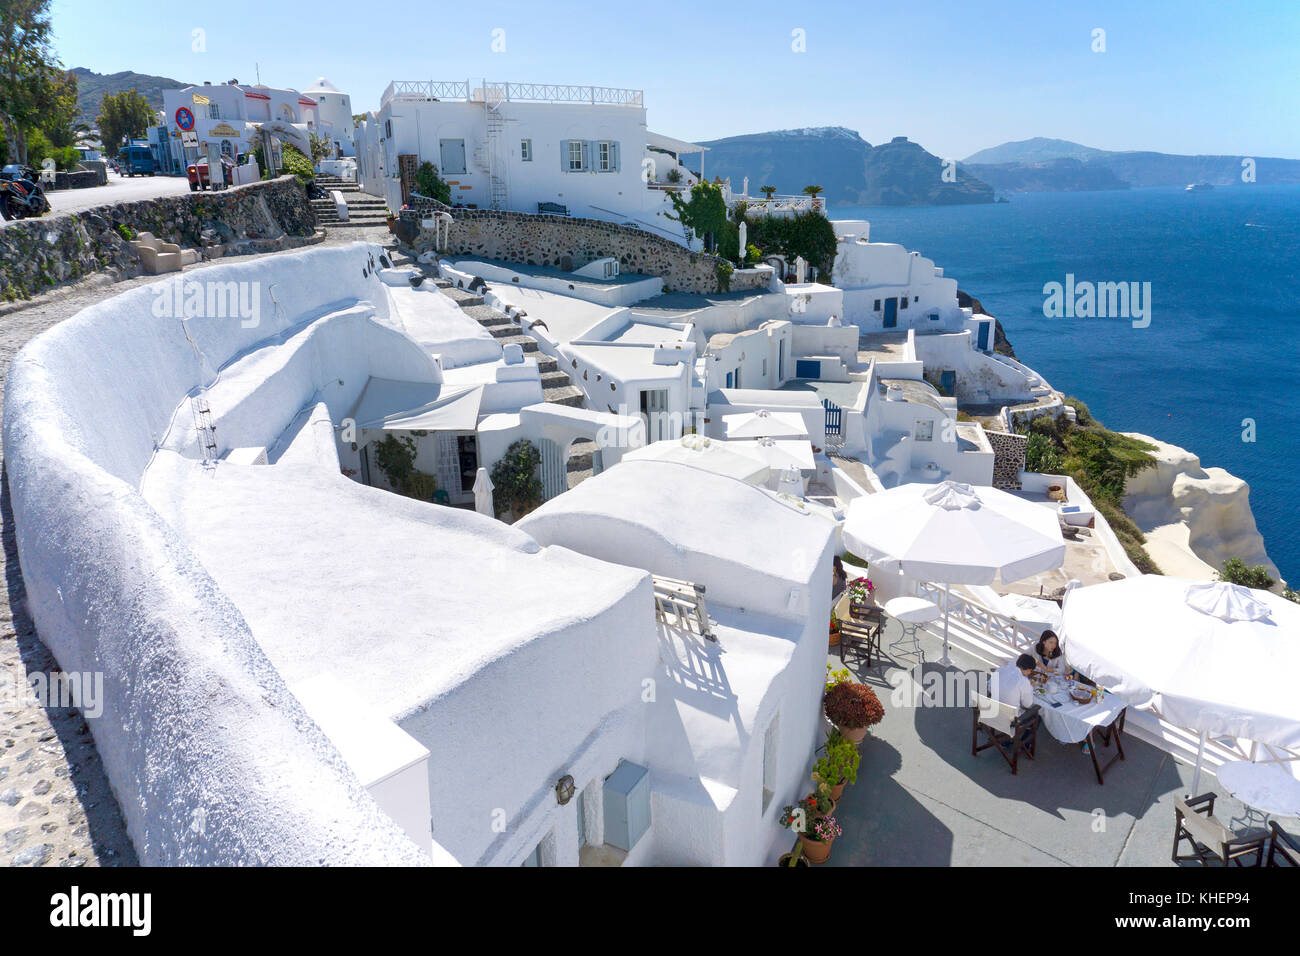 Luxury hotels complex at the crater edge of Oia, Santorin island, Cyclades, Aegean, Greece Stock Photo